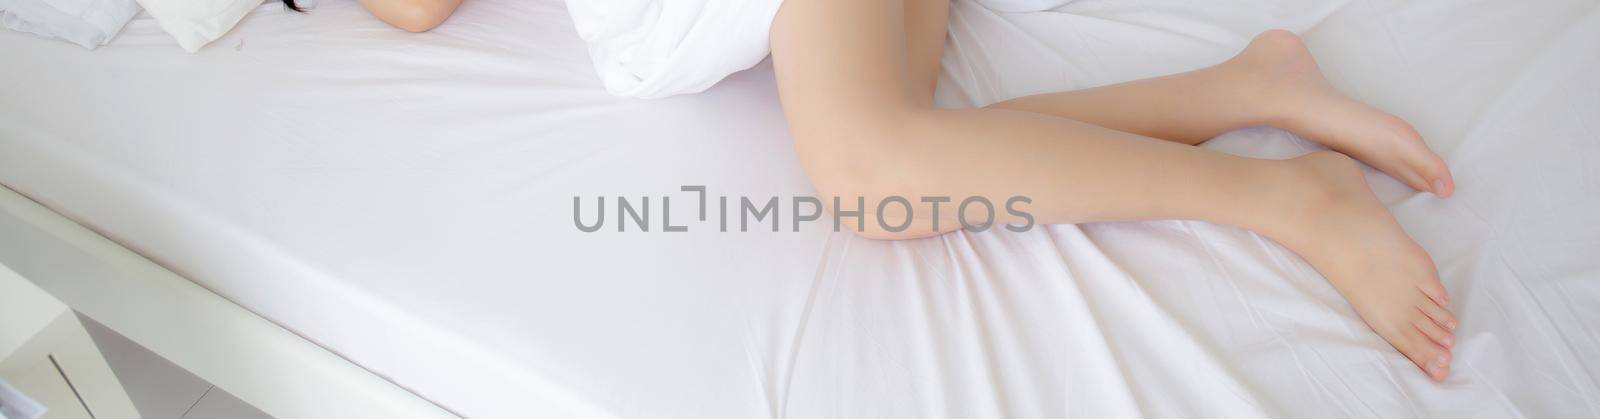 Beautiful leg of woman slim sexy on bed at bedroom, skin smooth of beauty girl feet health care, comfort and wellbeing, female lying sleep for relax with blanket, lifestyle concept, banner website.